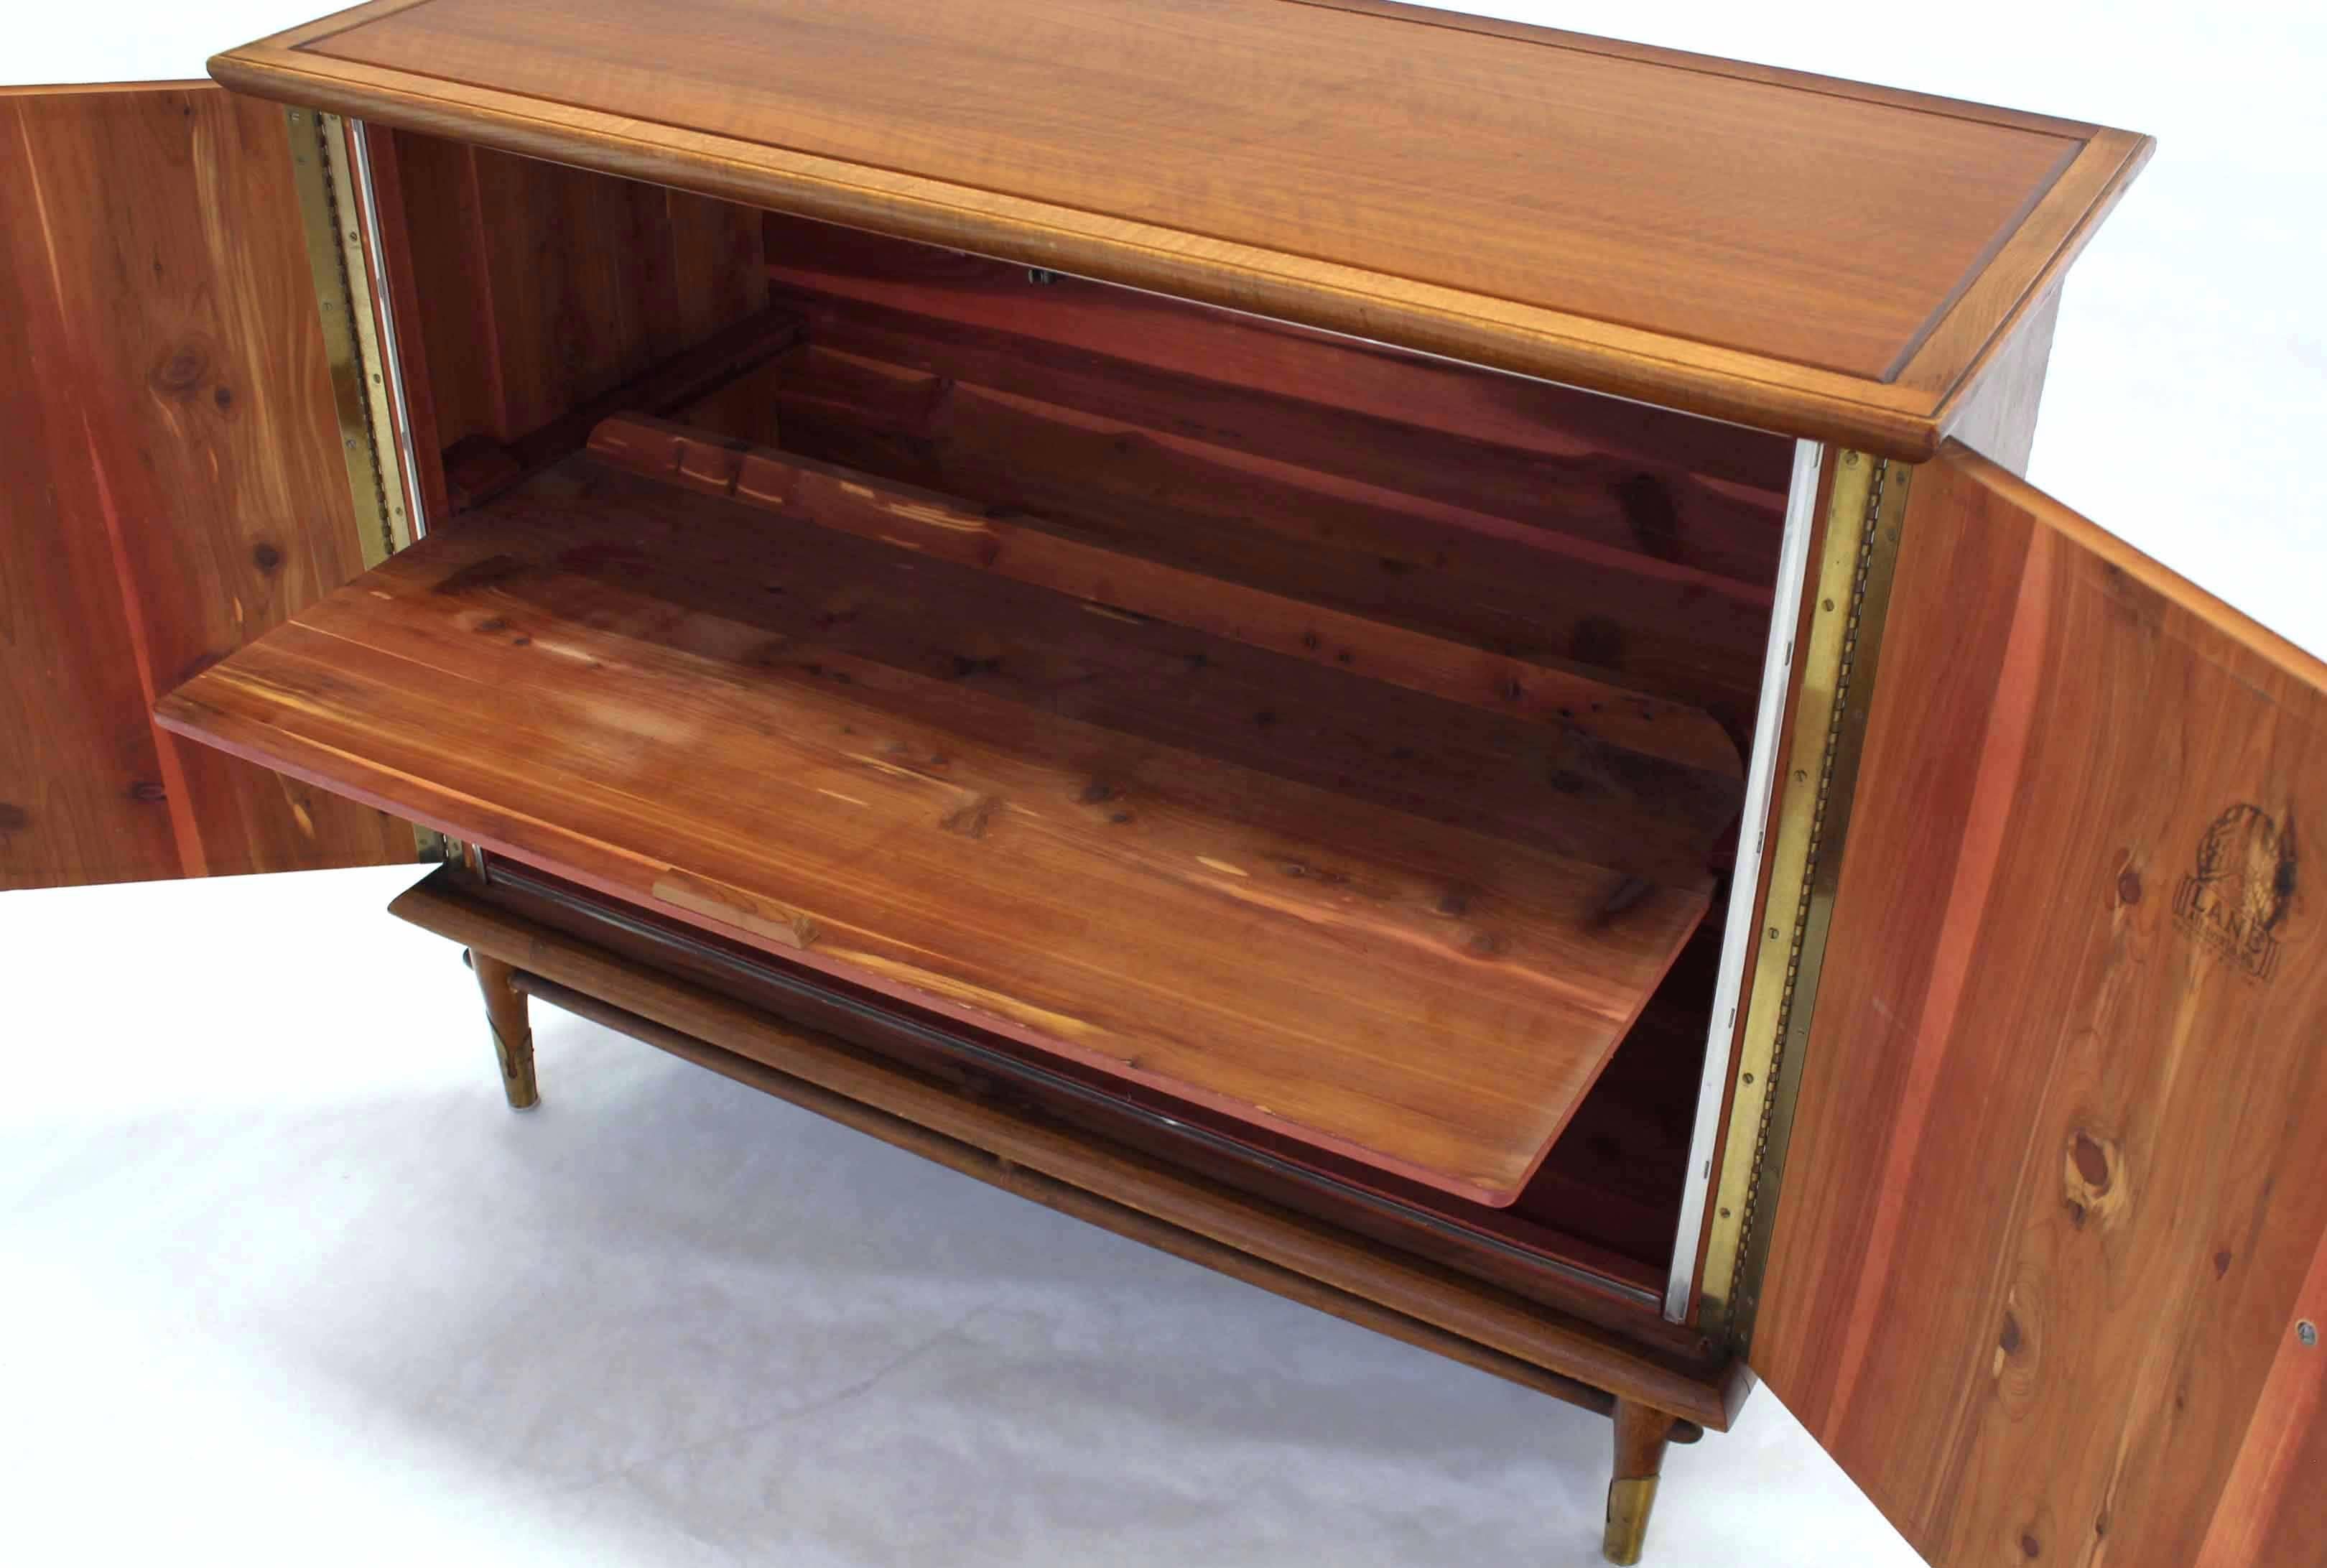 Hope chest alternative. Made to function like two doors dresser or bachelor cabinet. Two door with ring pulls one removable shelf finished in cedar.
